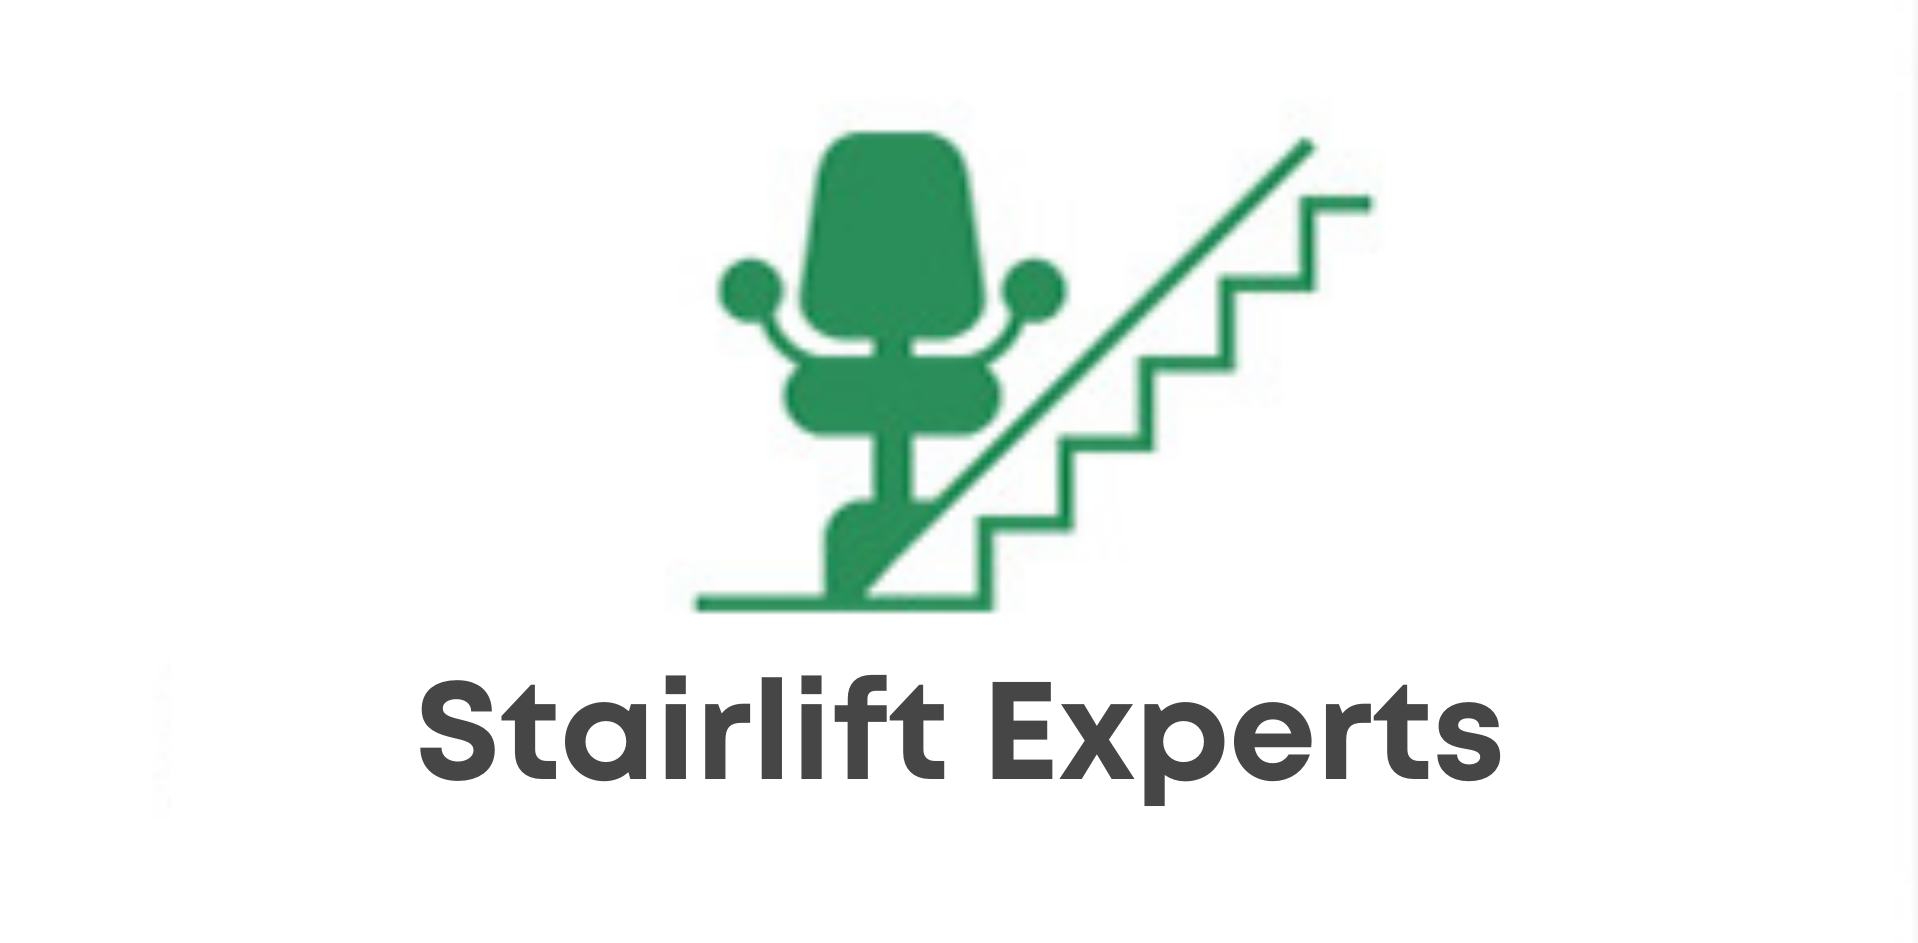 Stairlift Experts crop